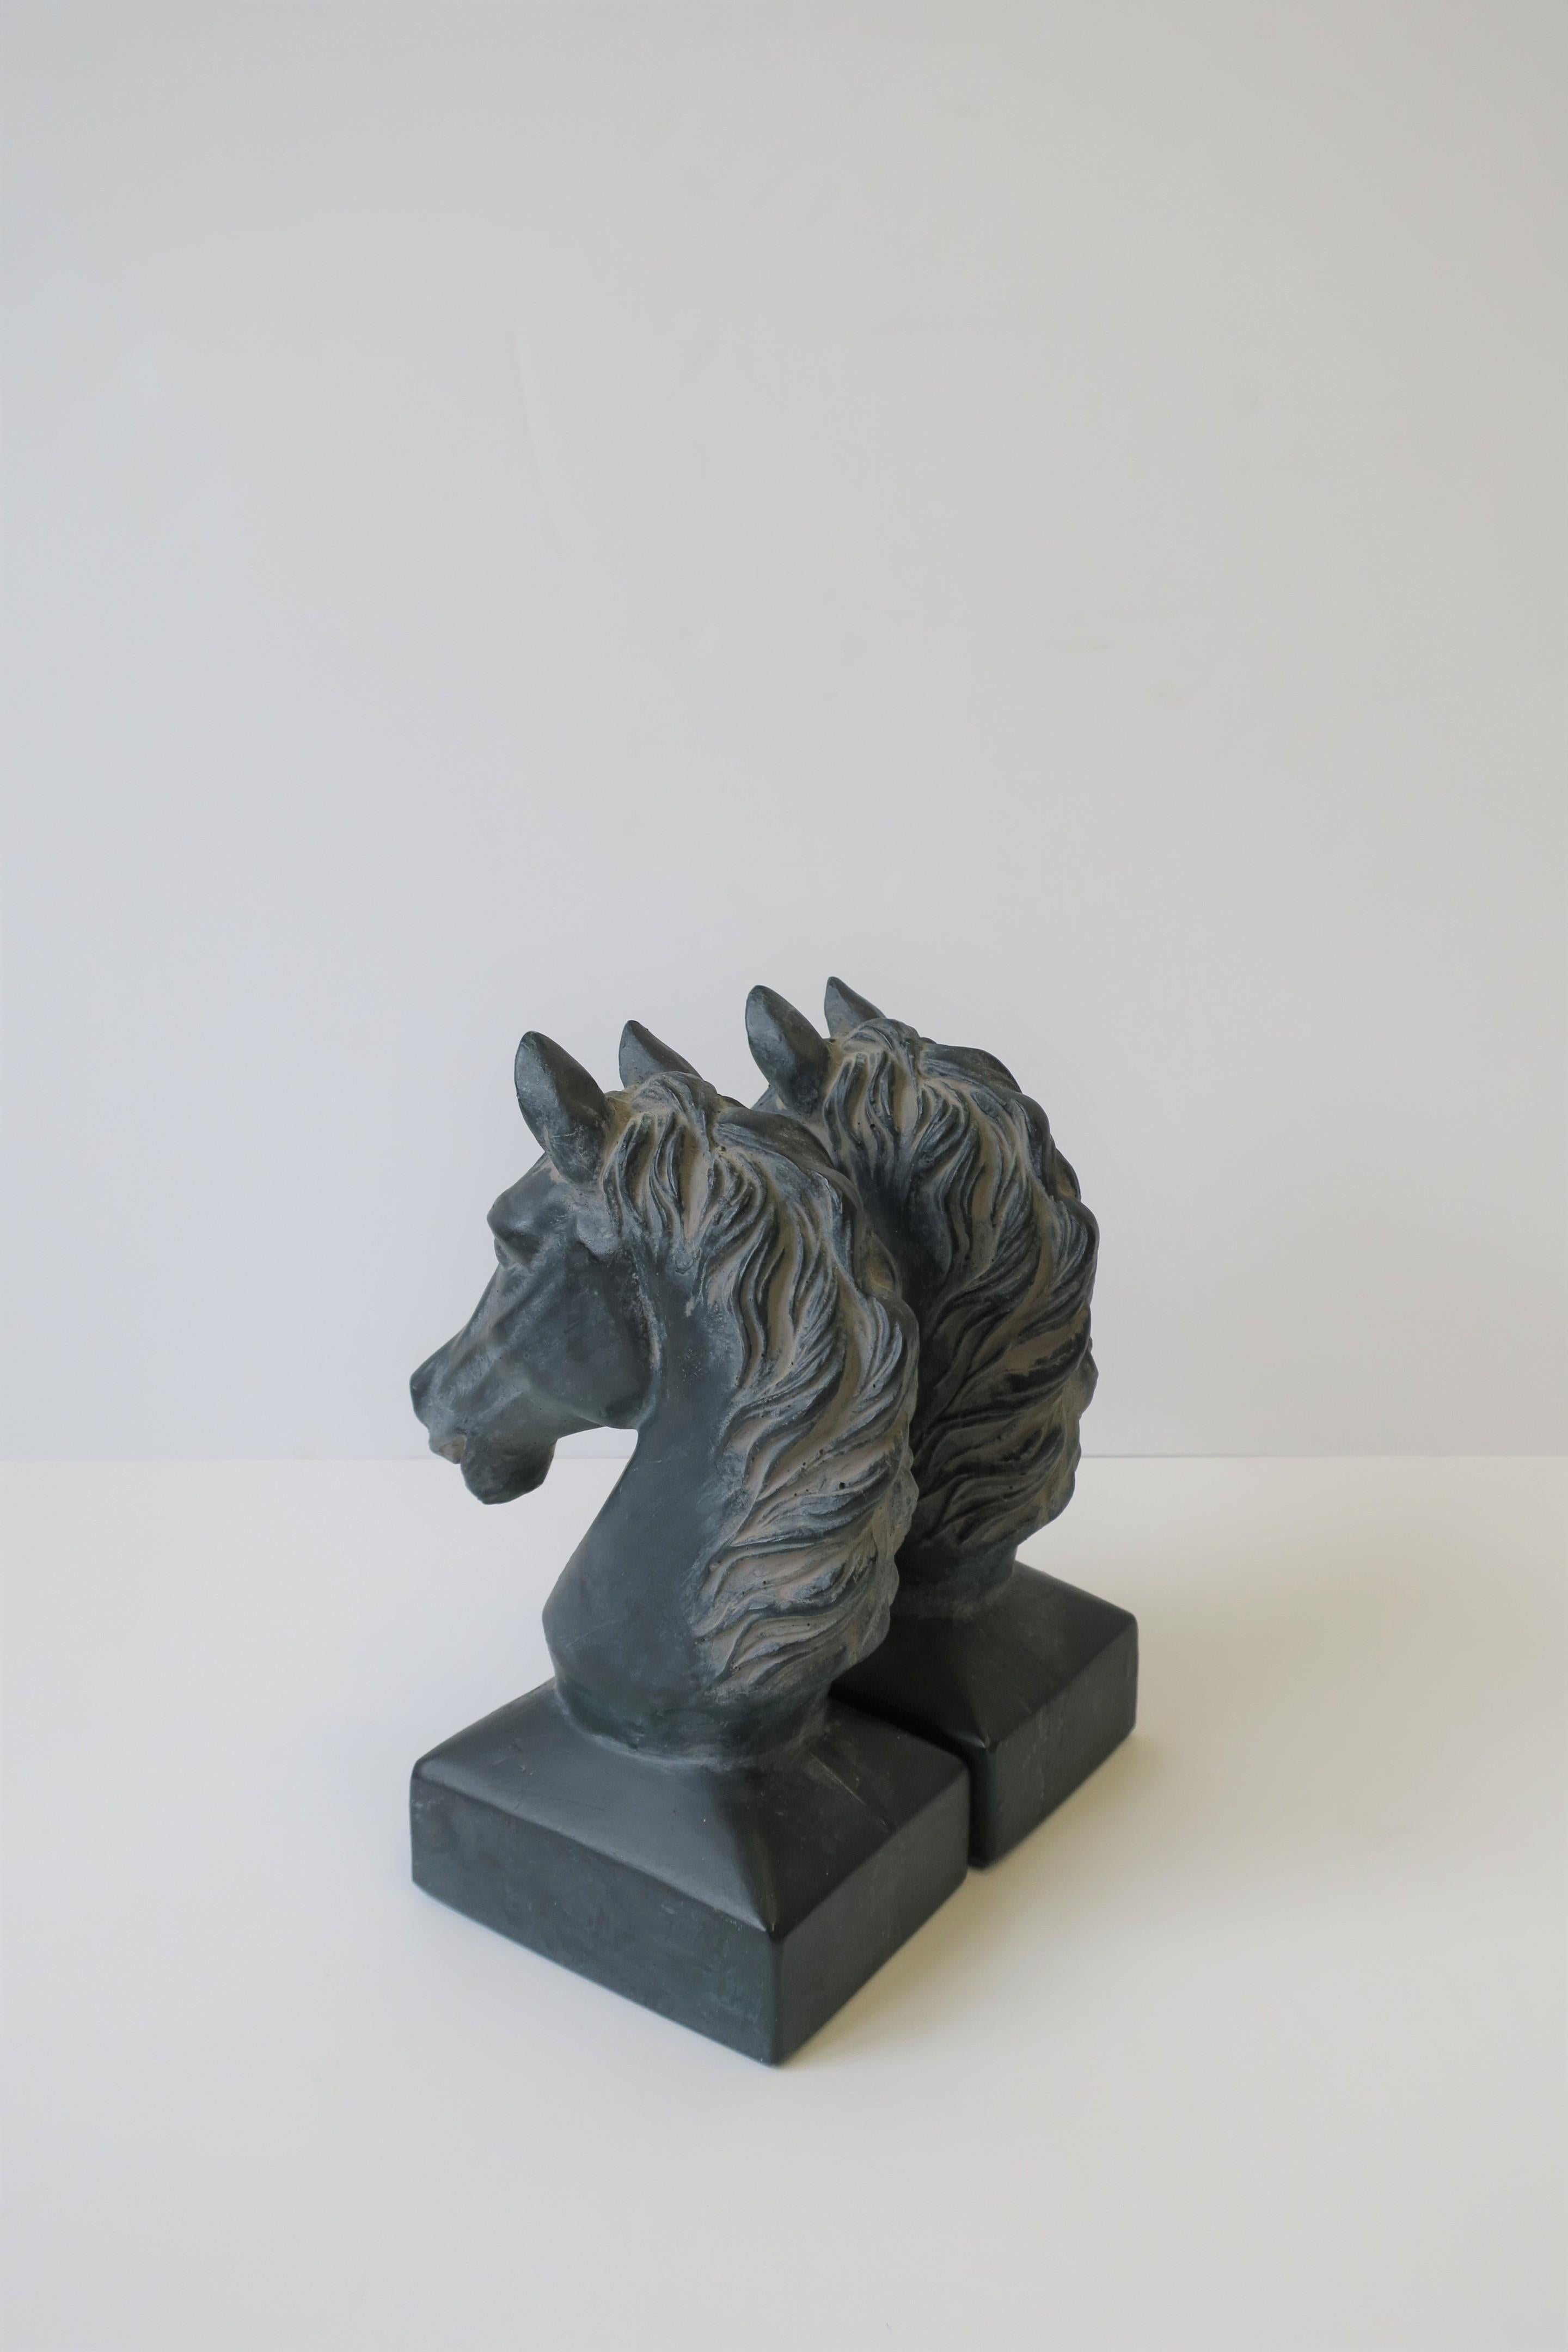 Pair of Vintage Horse or Equine Bookends 2